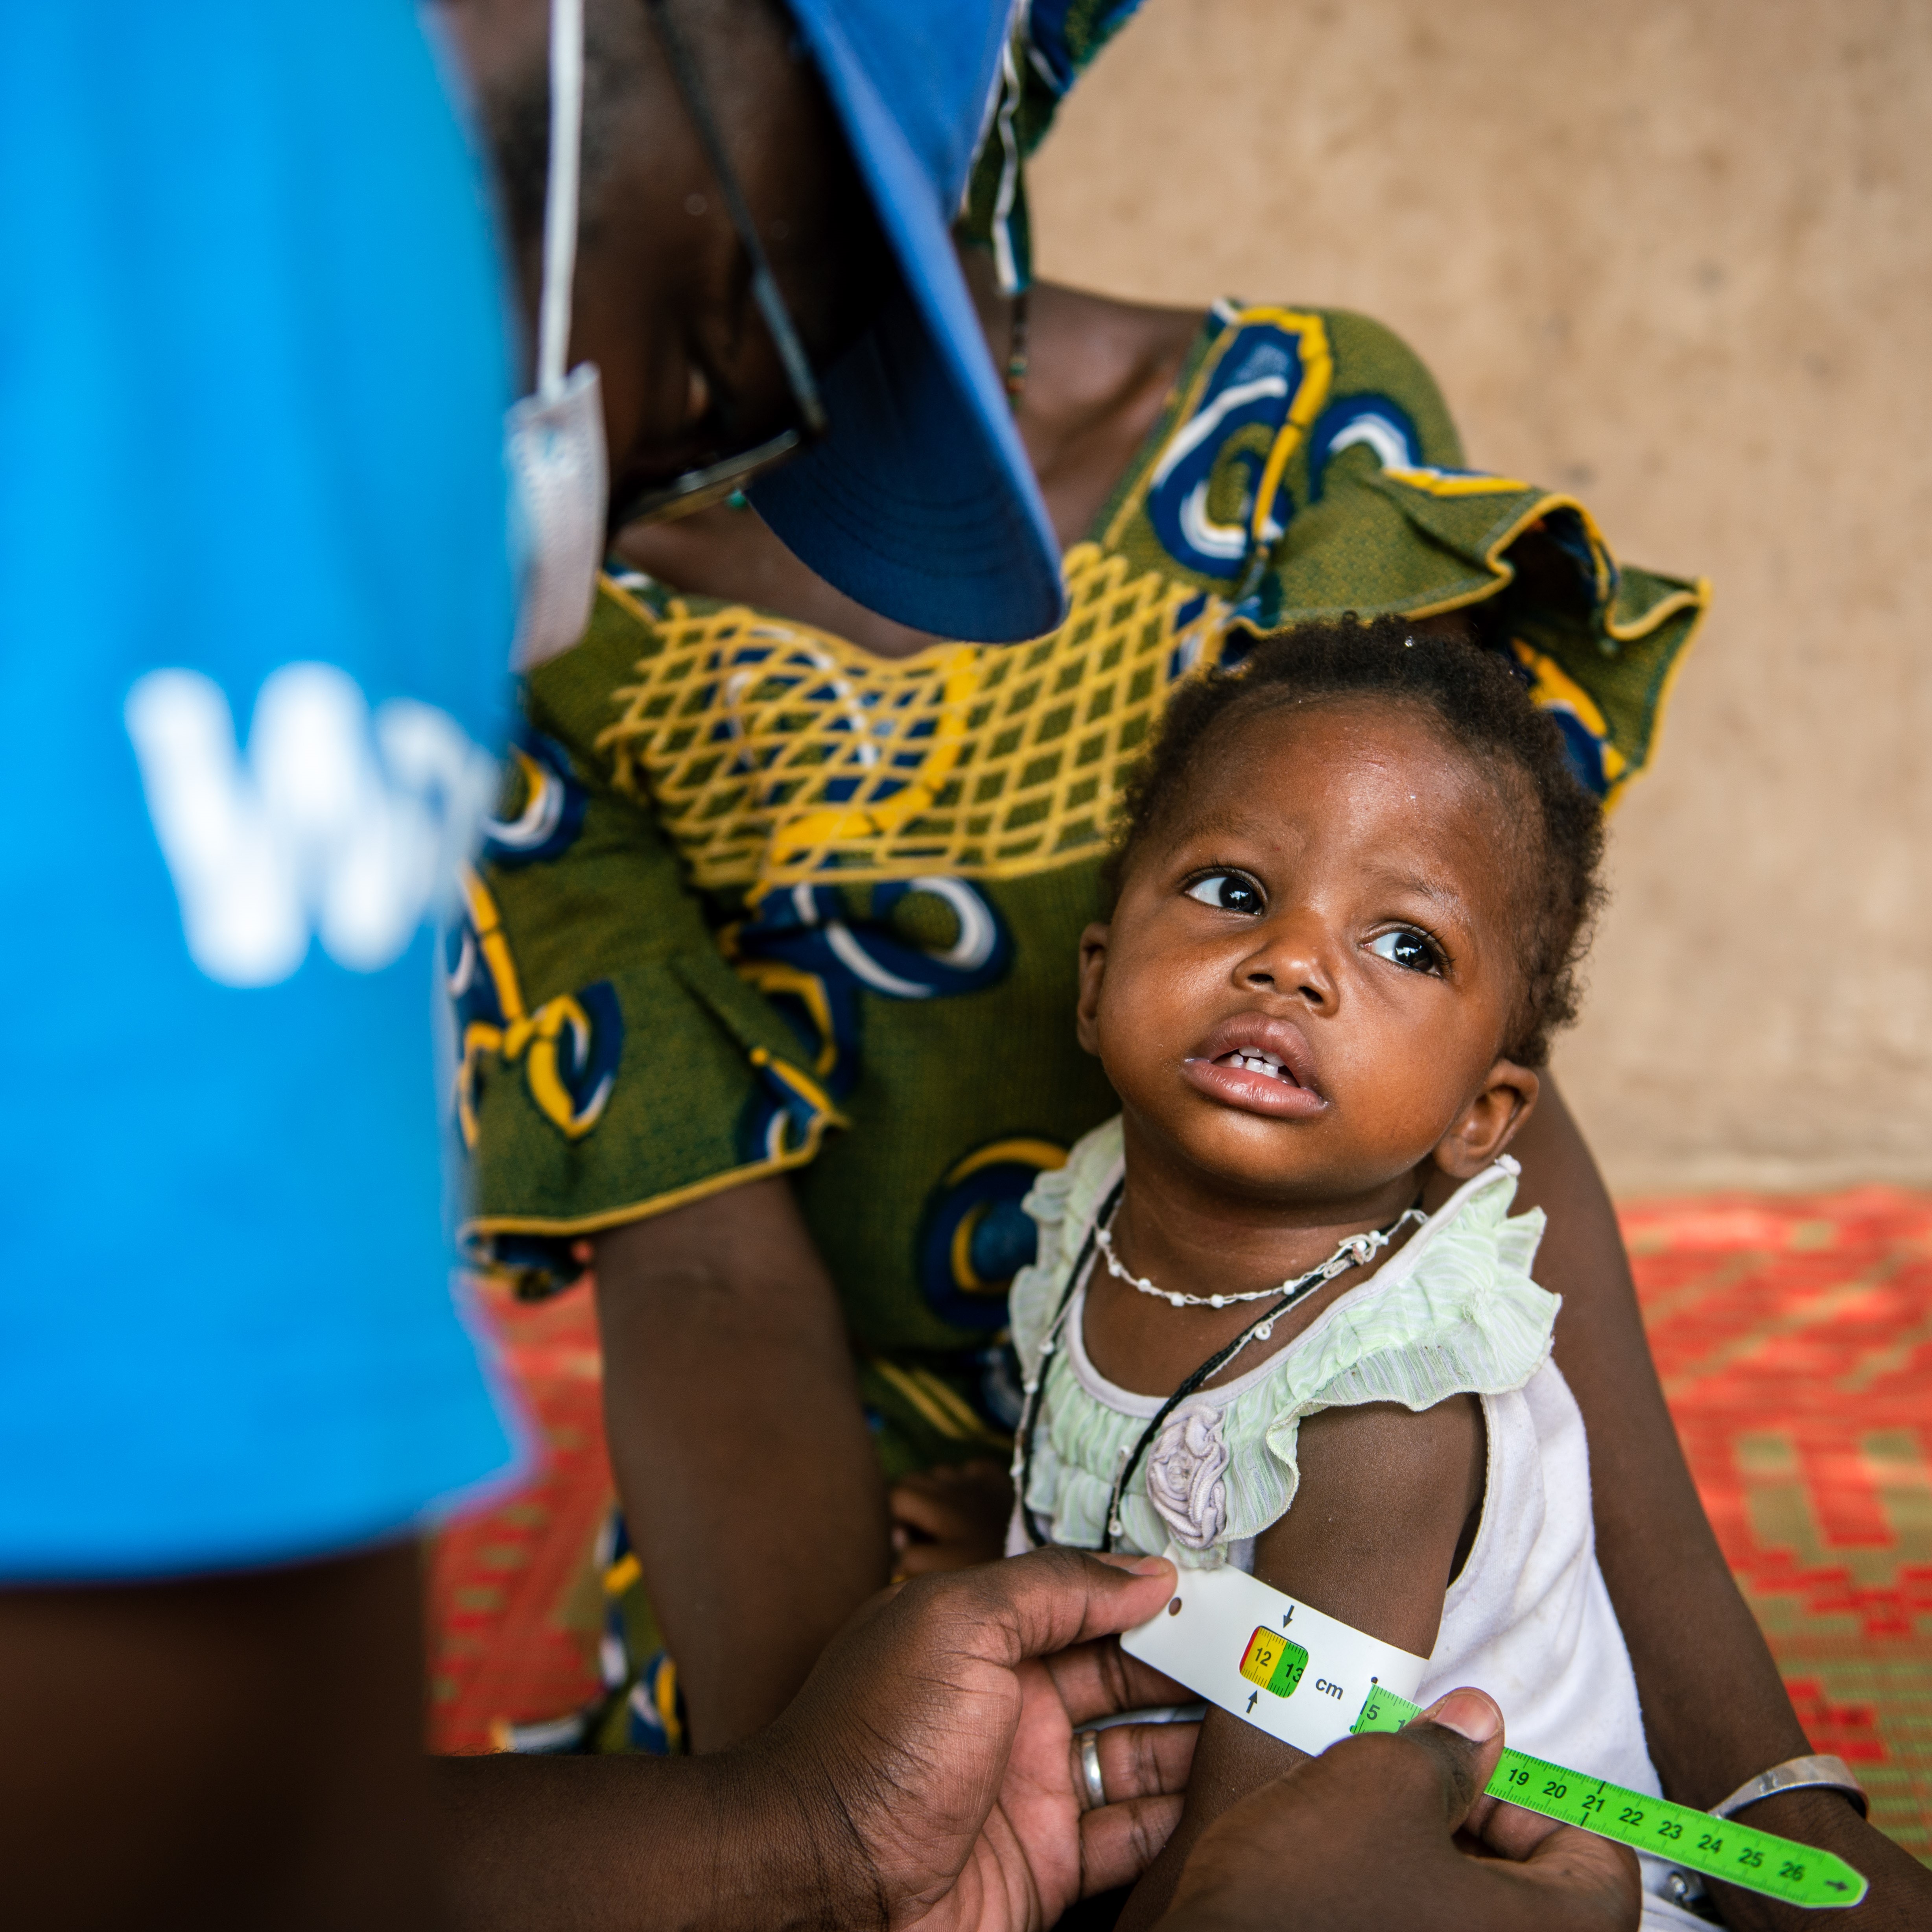 A WFP staff member measures Kadidia's arm, who is undergoing malnutrition treatment, during a visit to her home in Nioro, Mali, on 2 June 2022.